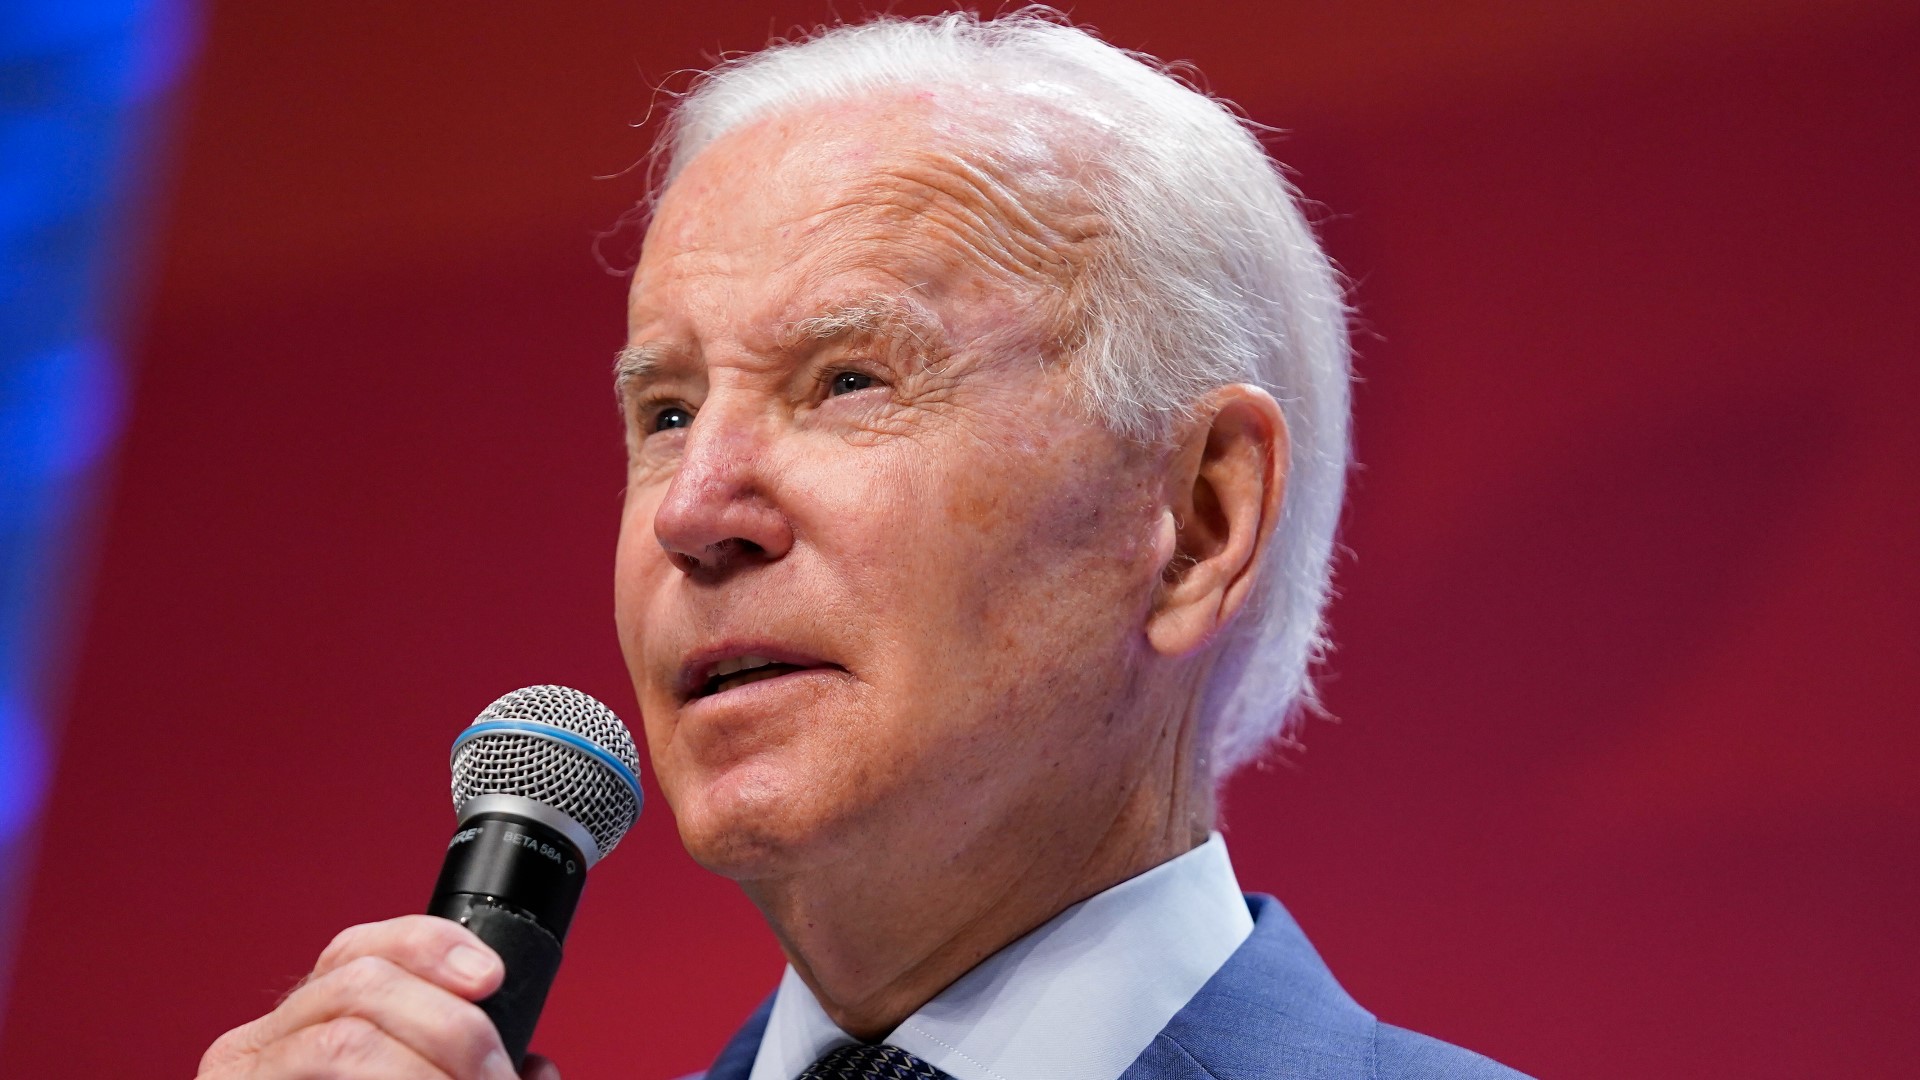 President Joe Biden ignored reporters' questions on Friday about the special counsel investigation looking into his handling of classified material.